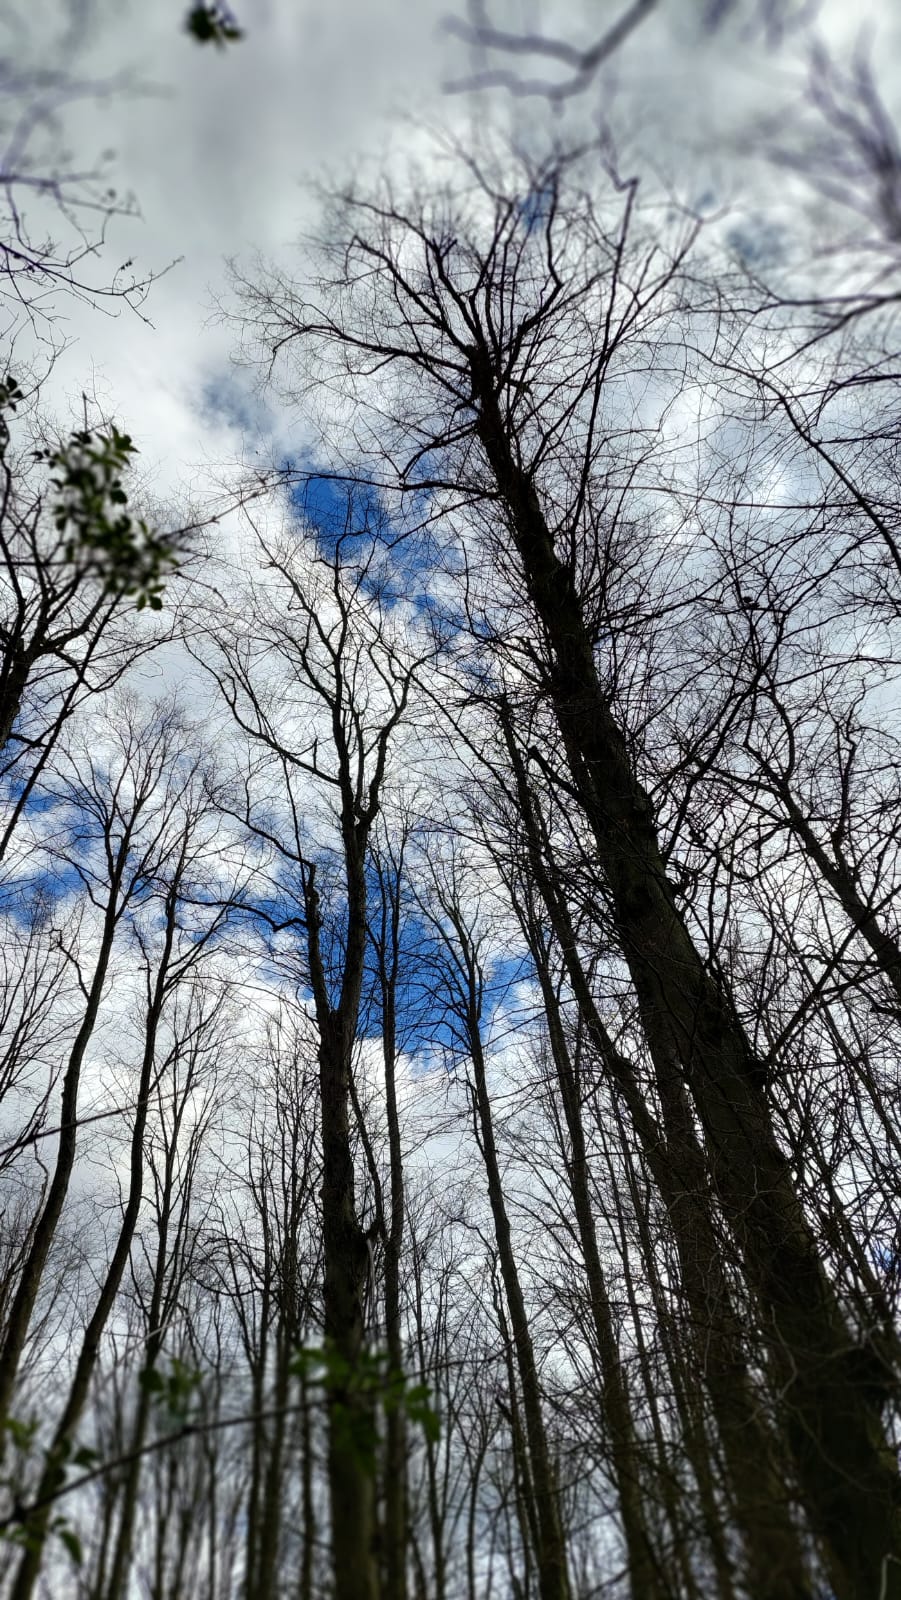 A photograph of tree tops in April, against a cloudy blue sky